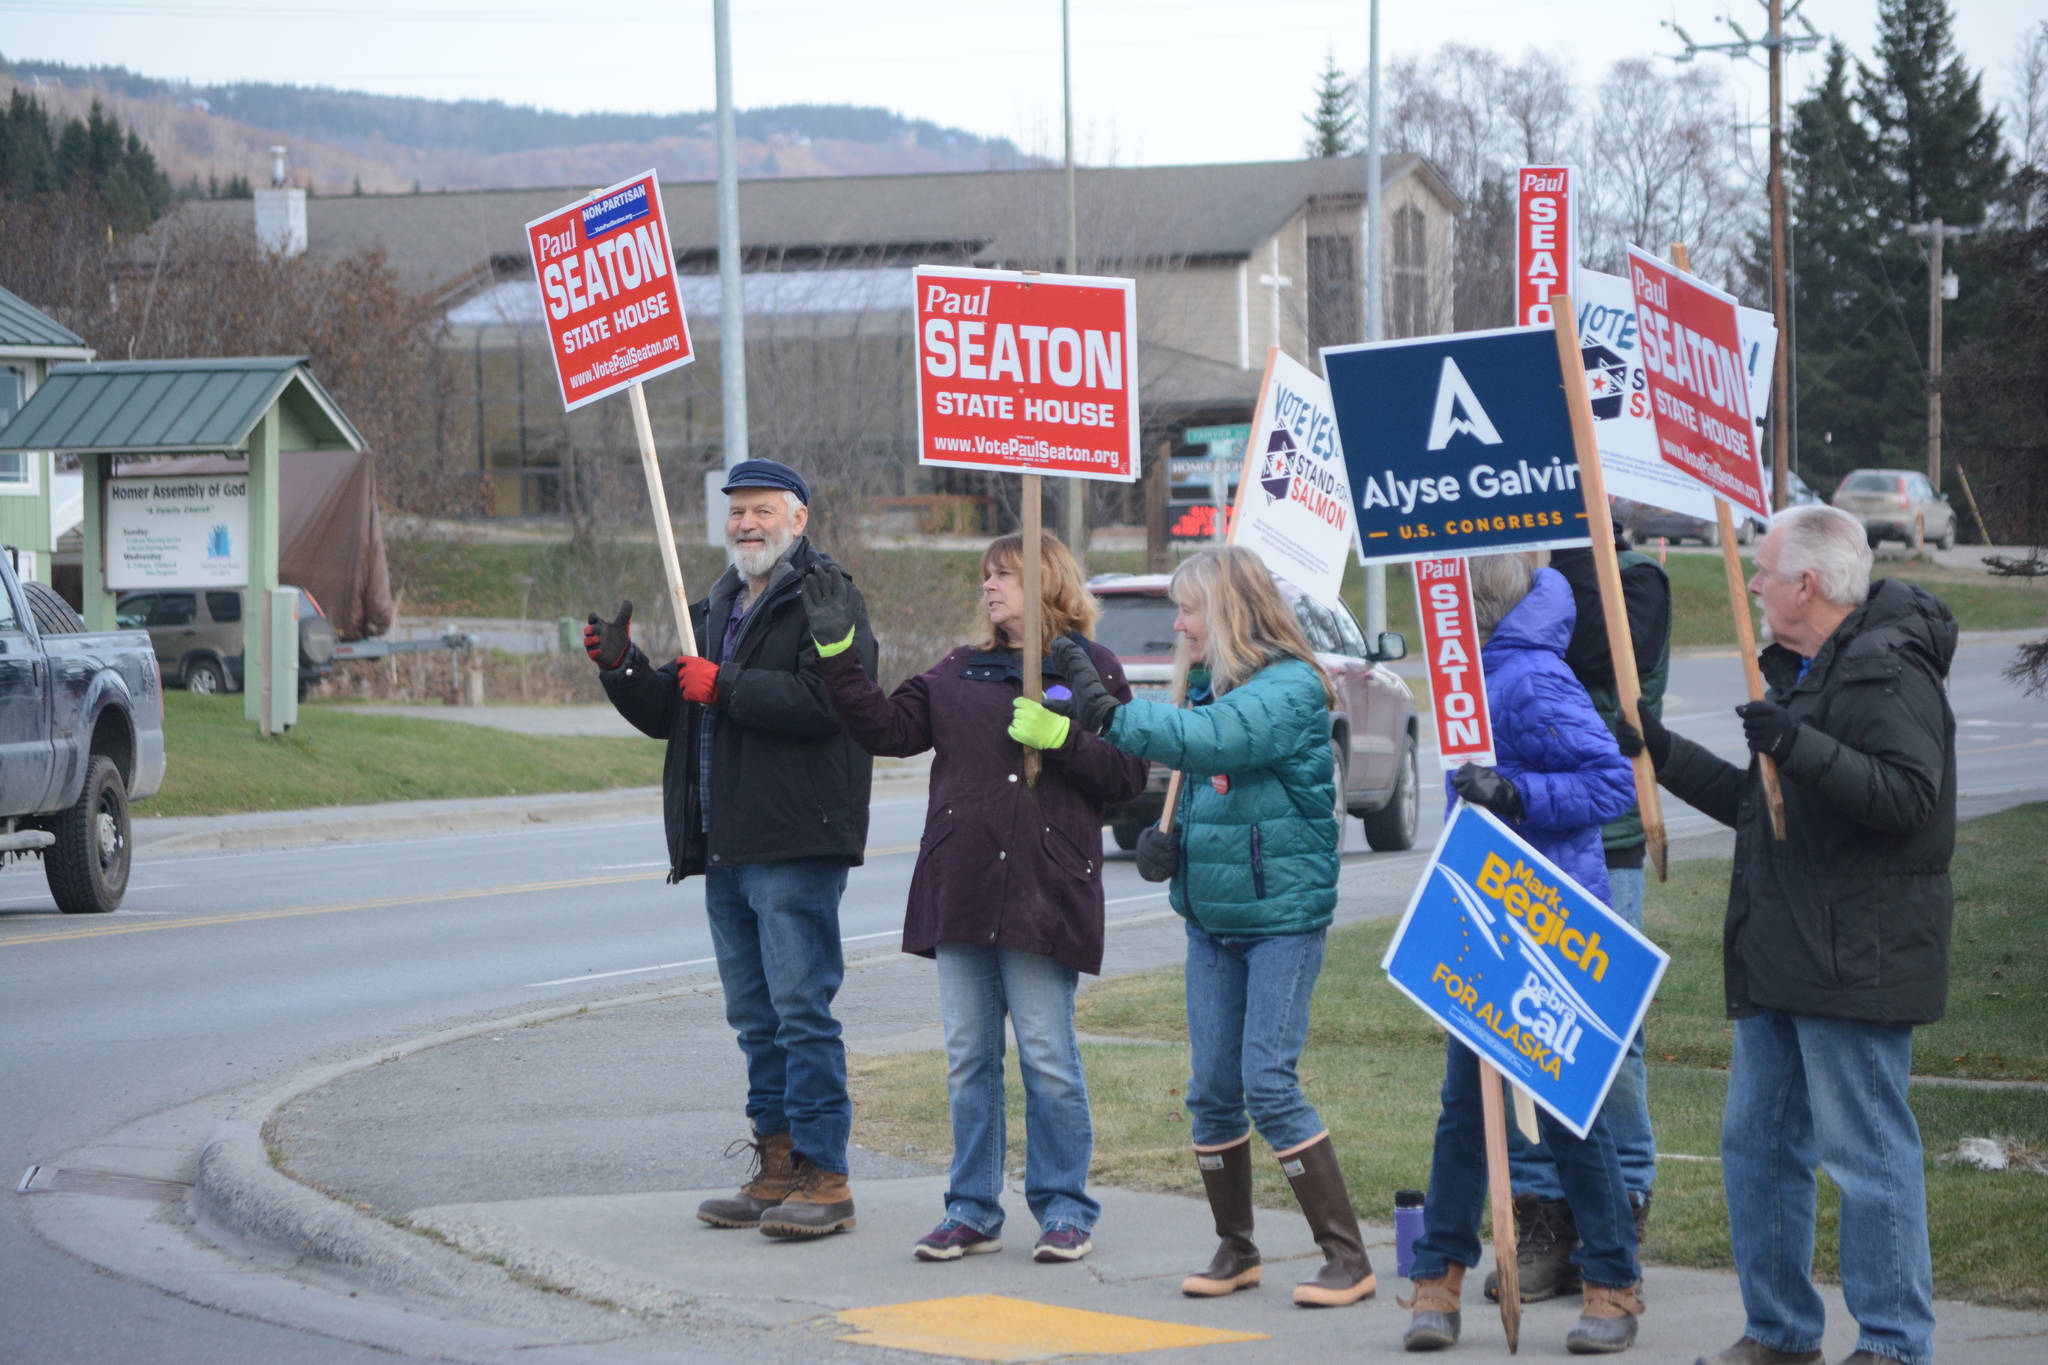 Rep. Paul Seaton, left, waves signs with other supports at the corner of Lake Street and East End Road on Nov. 6, 2018, in Homer, Alaska. (Photo by Michael Armstrong/Homer News)